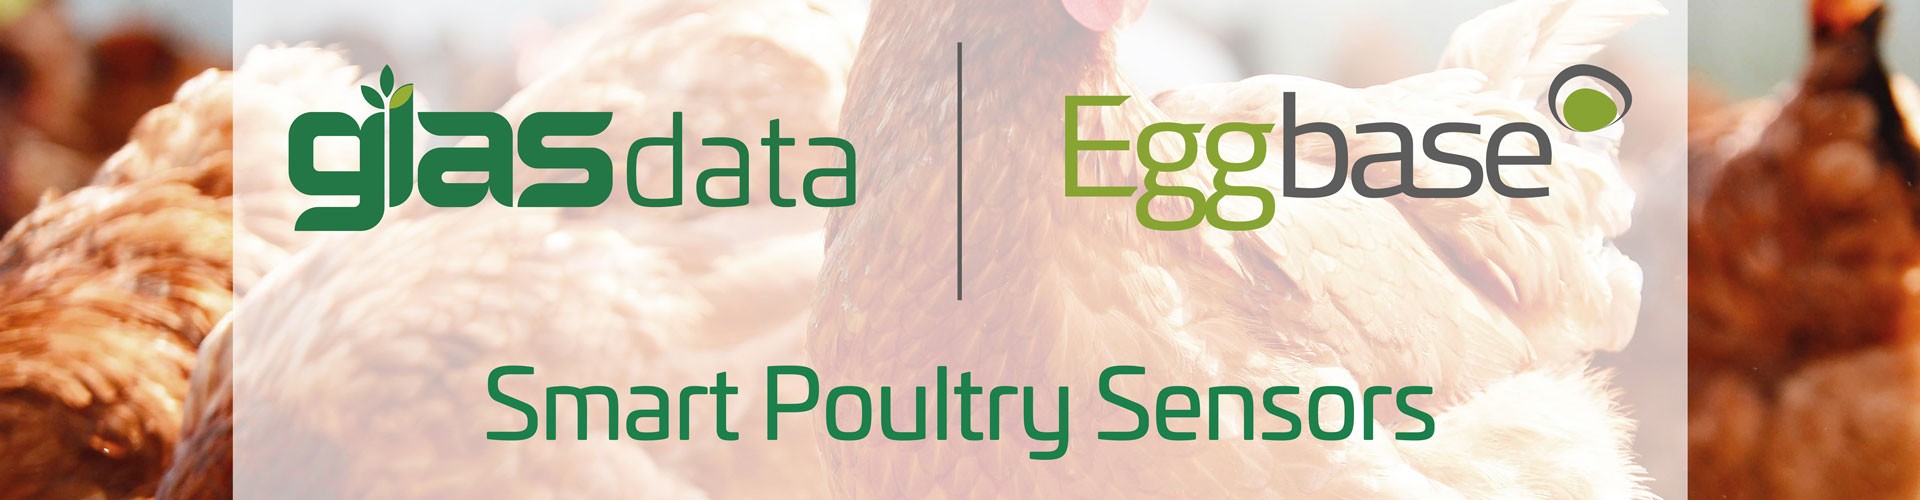 glas data and eggbase logos over image of chickens